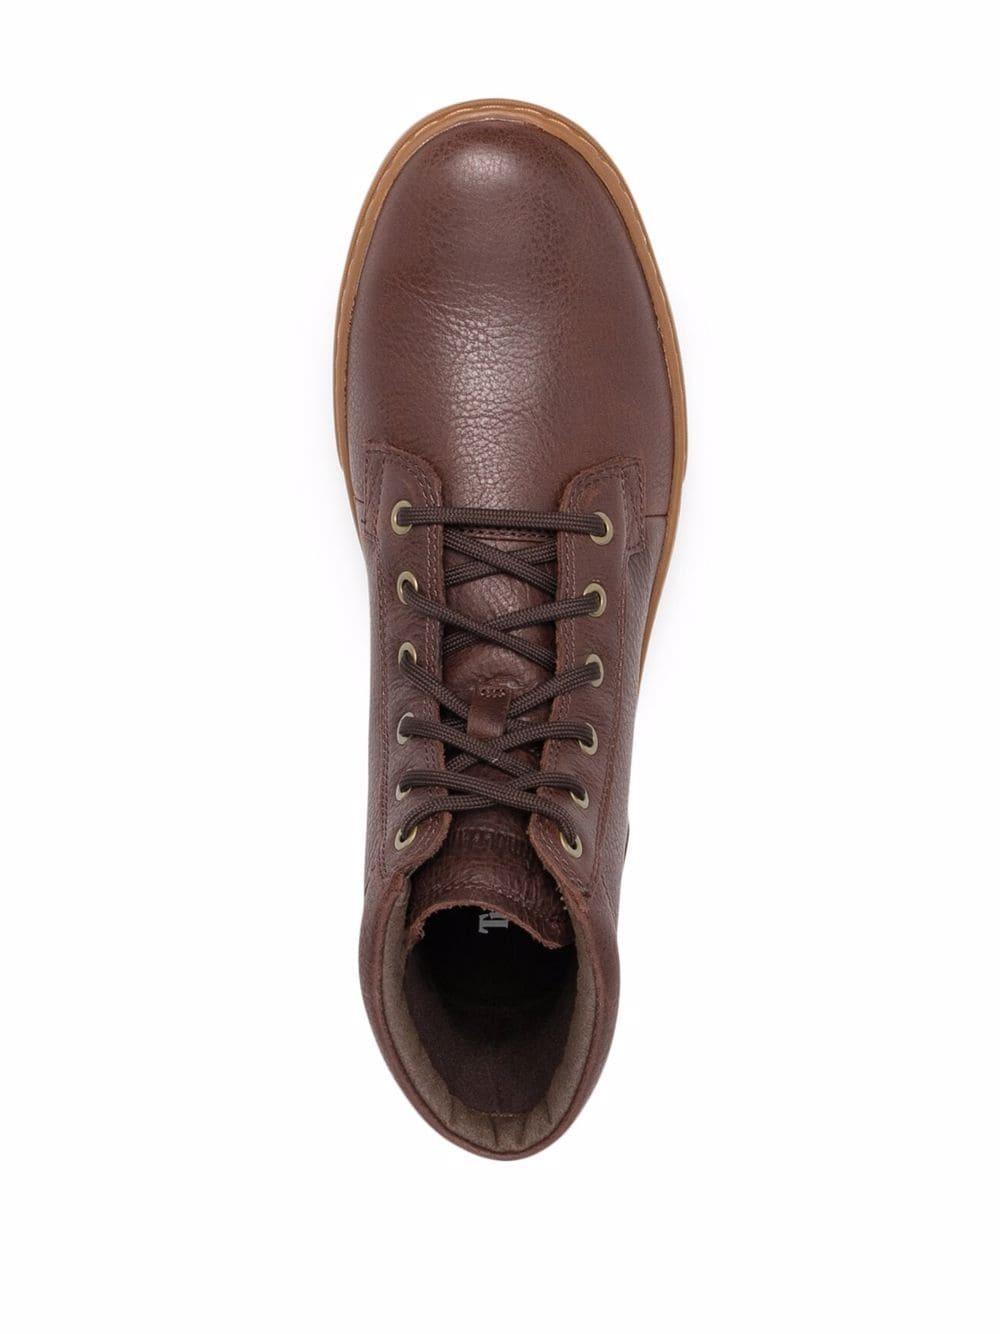 Timberland Donna Leather Lace Up Boots in Brown for Men - Save 7% - Lyst